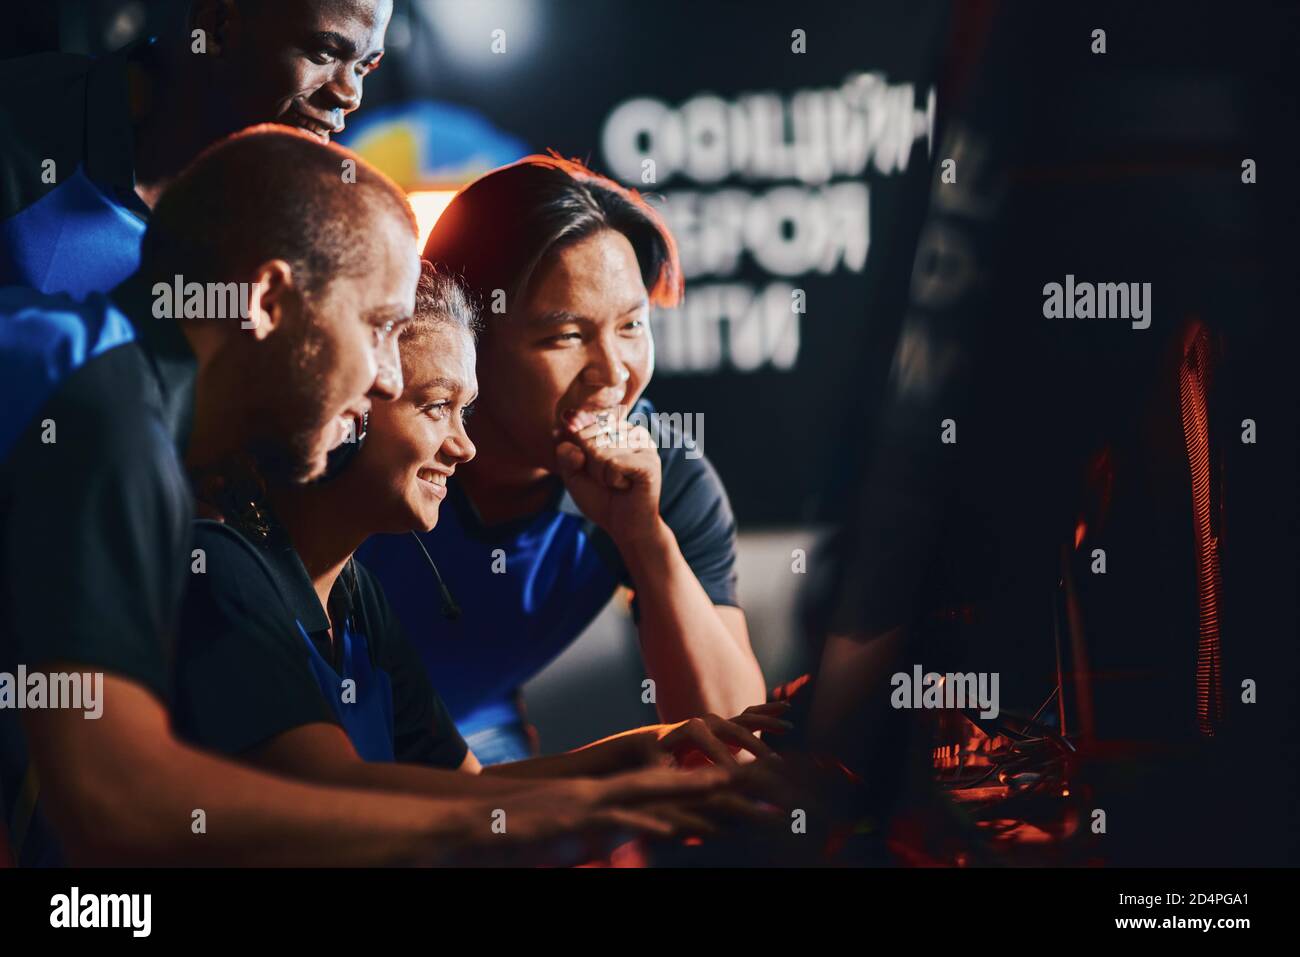 We are winners. Team of happy professional cybersport gamers looking at PC screen and feeling excited and happy while participating in eSport tournament Stock Photo